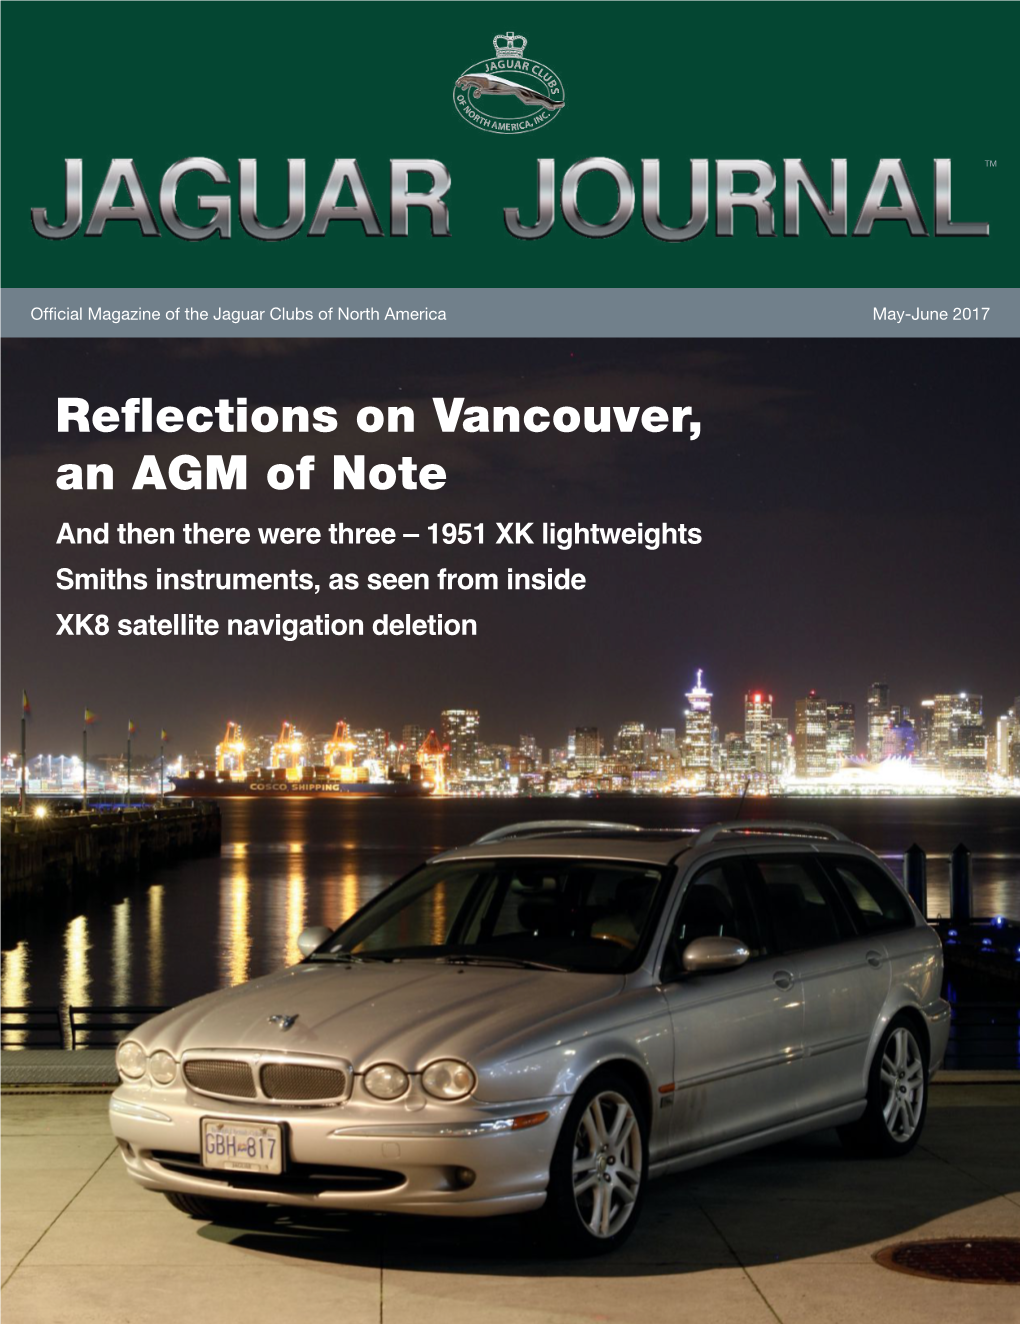 Reflections on Vancouver, an AGM of Note